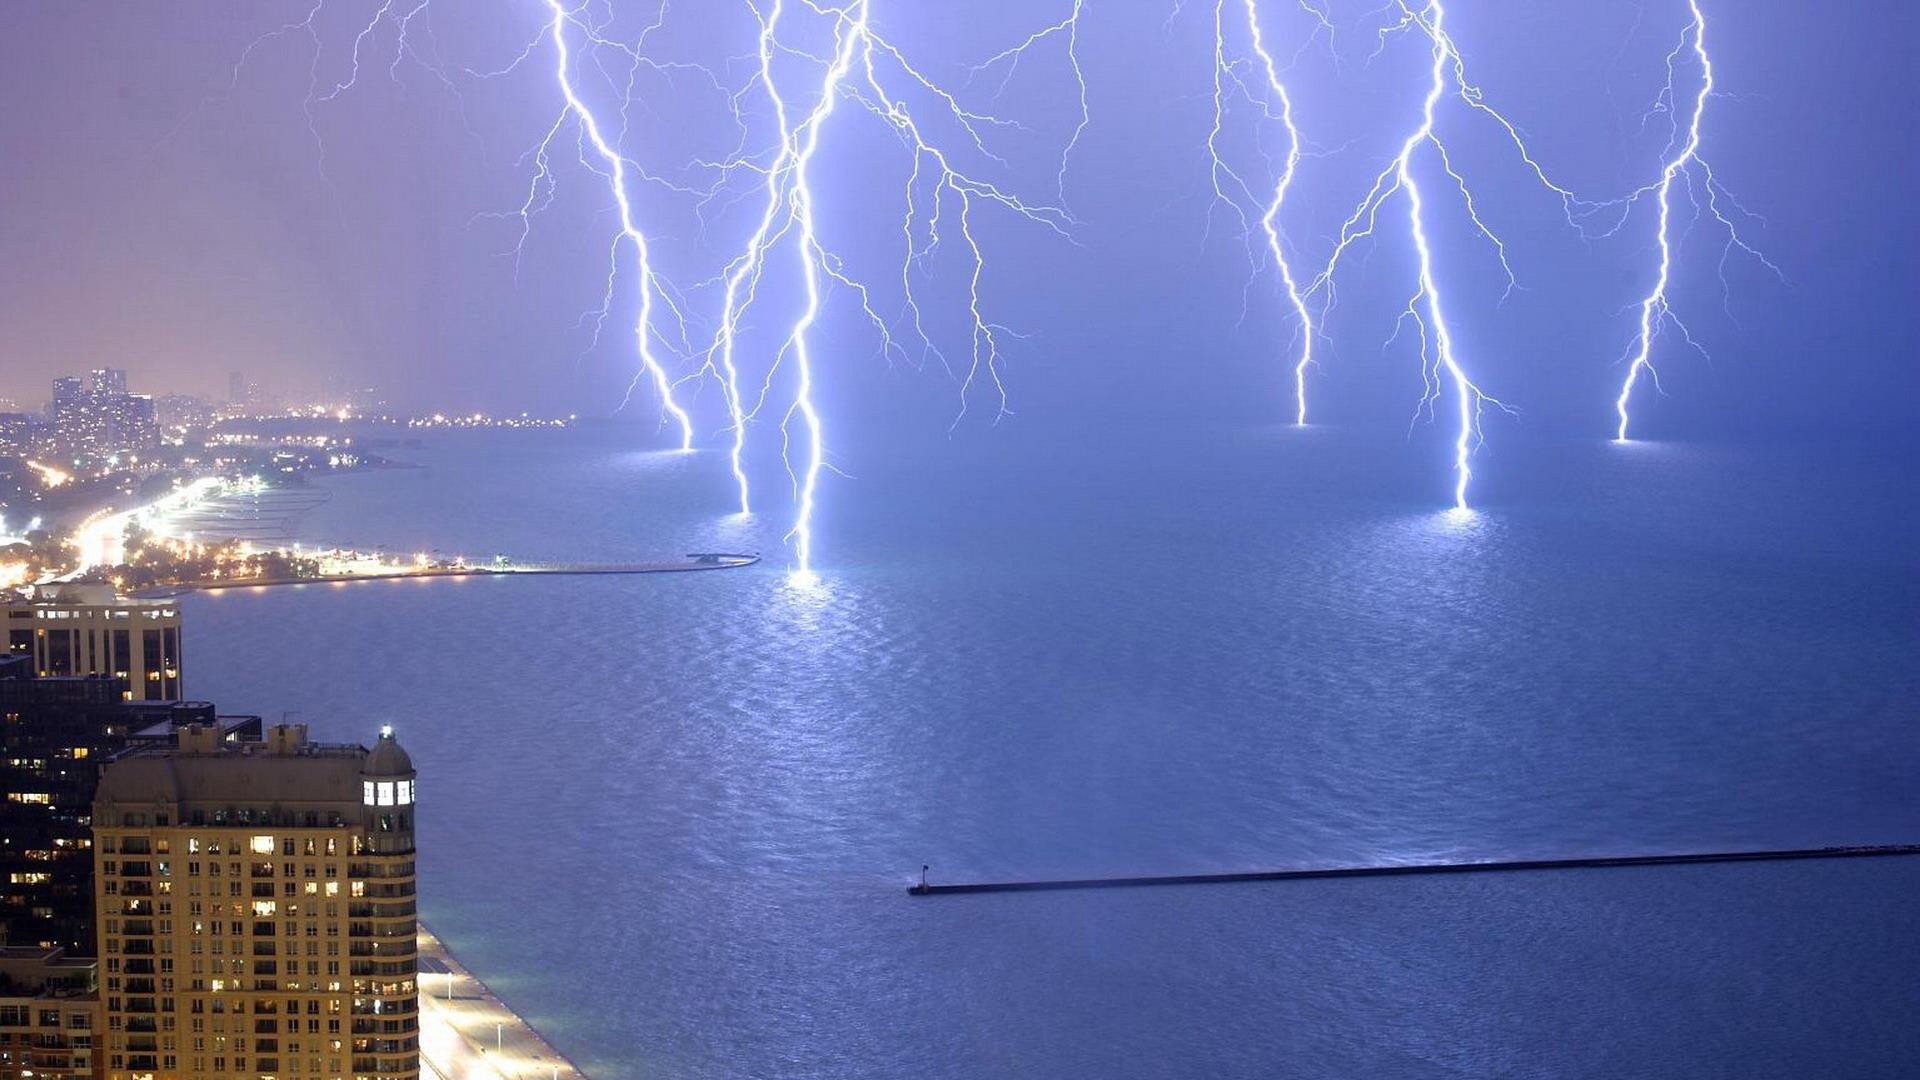 1920x1080 cool images,water, bolts, storm, buildings, geo, samsung,hd nature wallpapers  lightning, beaches, cities, sea, nature, lightning Wallpaper HD